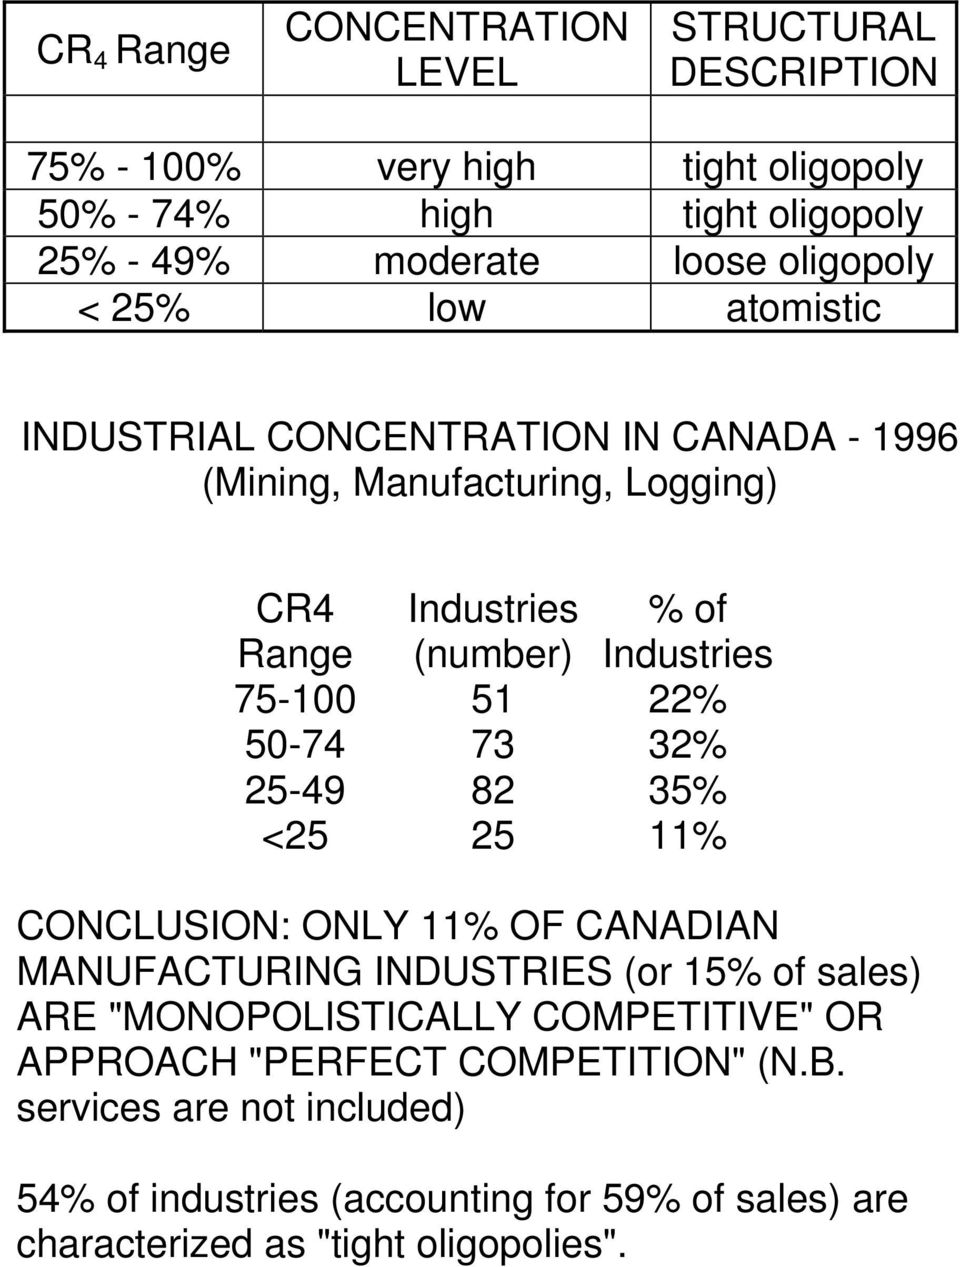 75-100 51 22% 50-74 73 32% 25-49 82 35% <25 25 11% CONCLUSION: ONLY 11% OF CANADIAN MANUFACTURING INDUSTRIES (or 15% of sales) ARE "MONOPOLISTICALLY